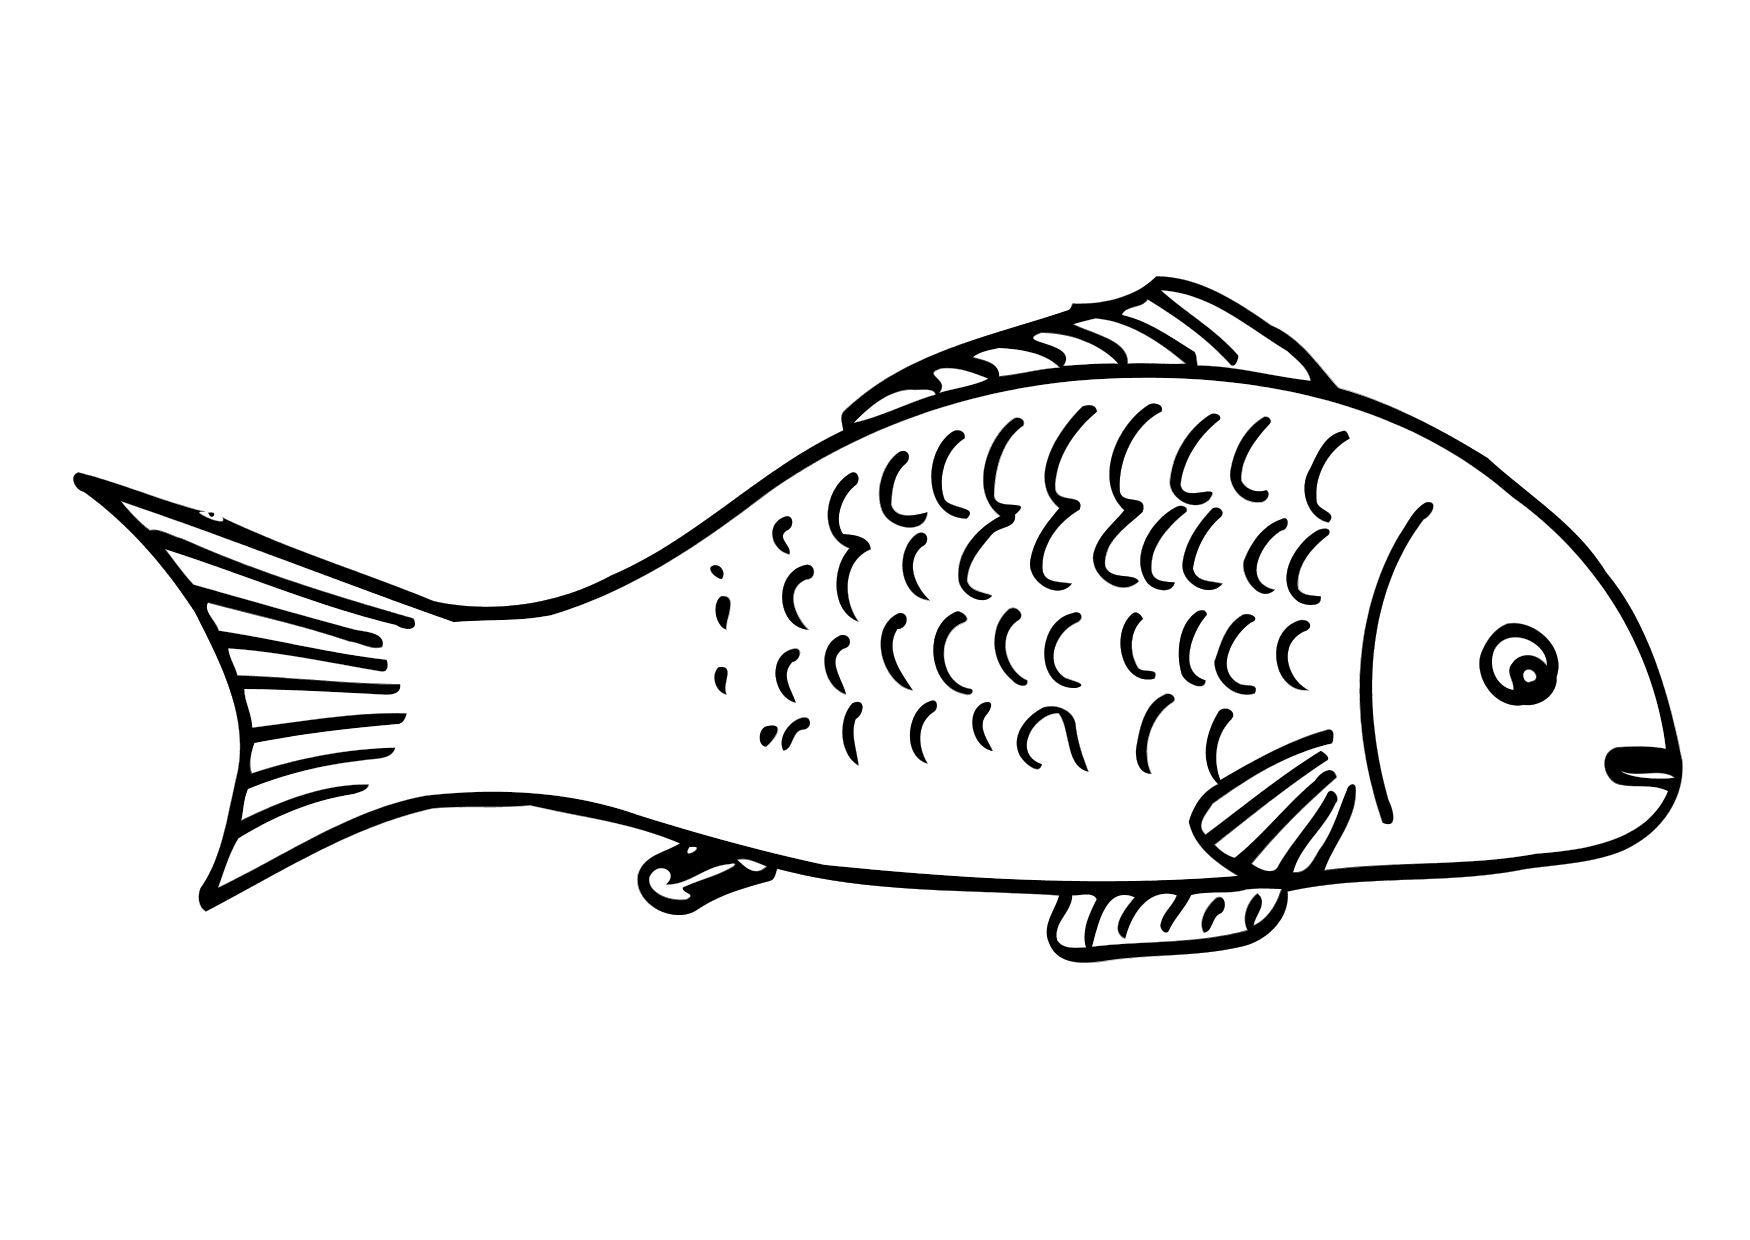 Simple Fish Coloring Pages